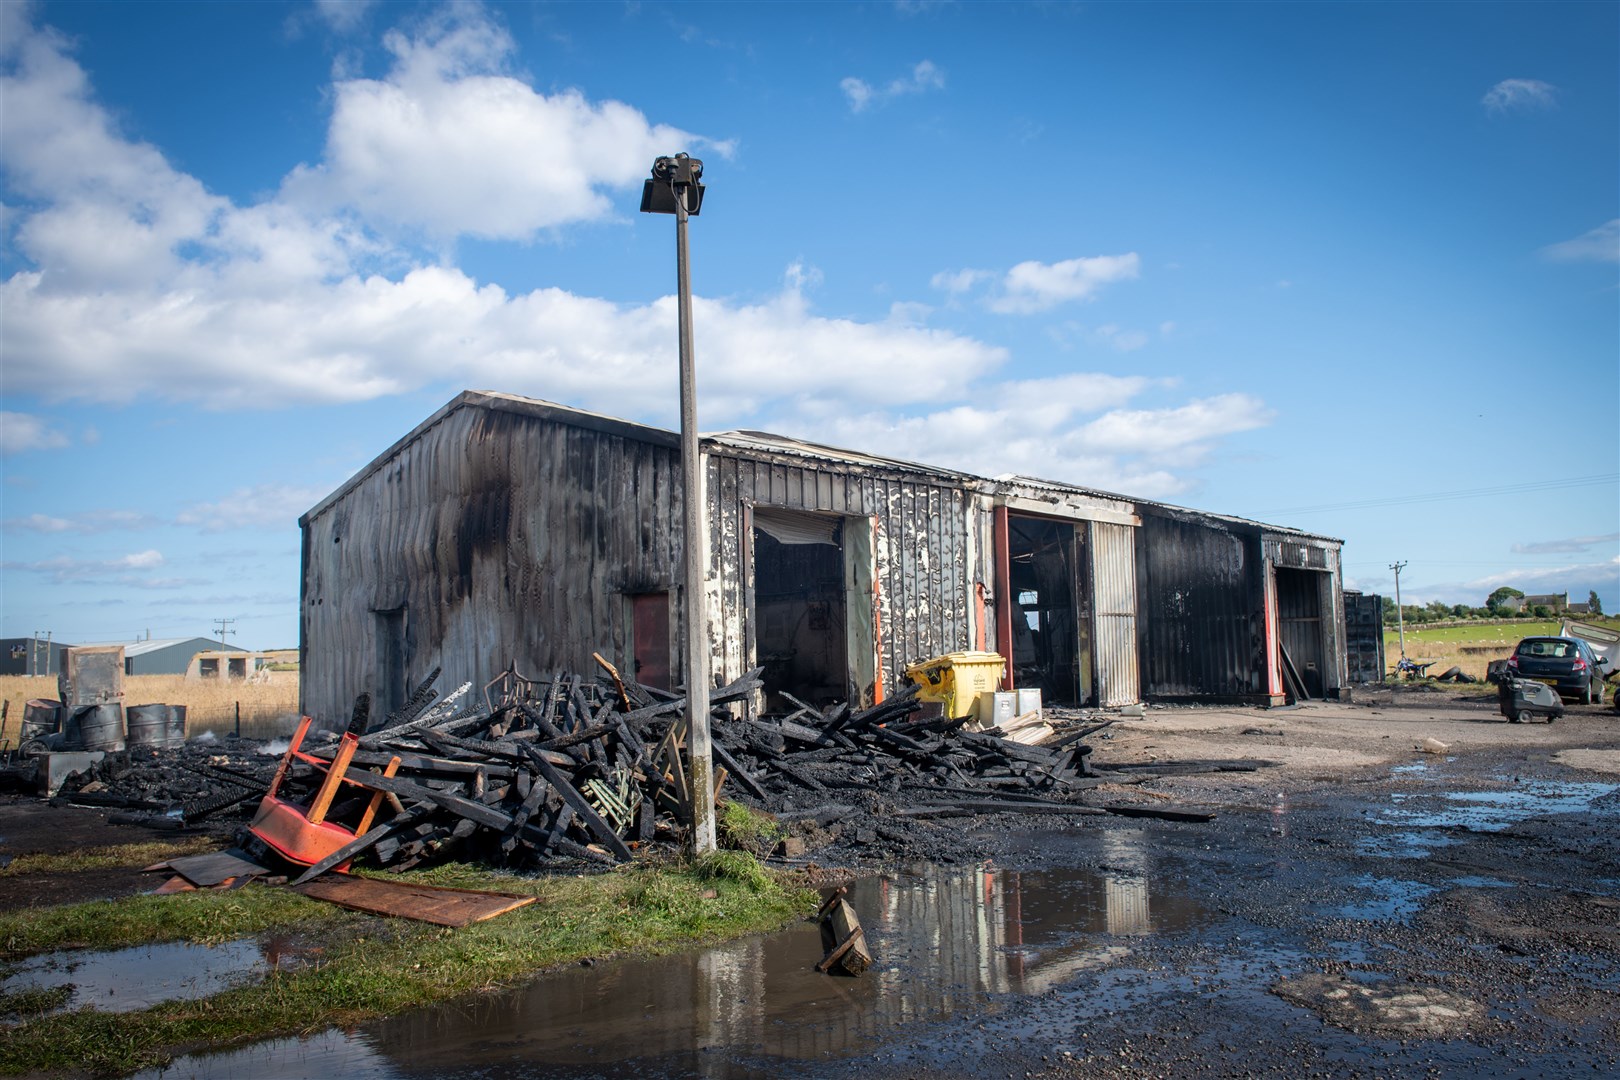 Fire engines tackling blaze at Ross-shire industrial estate.